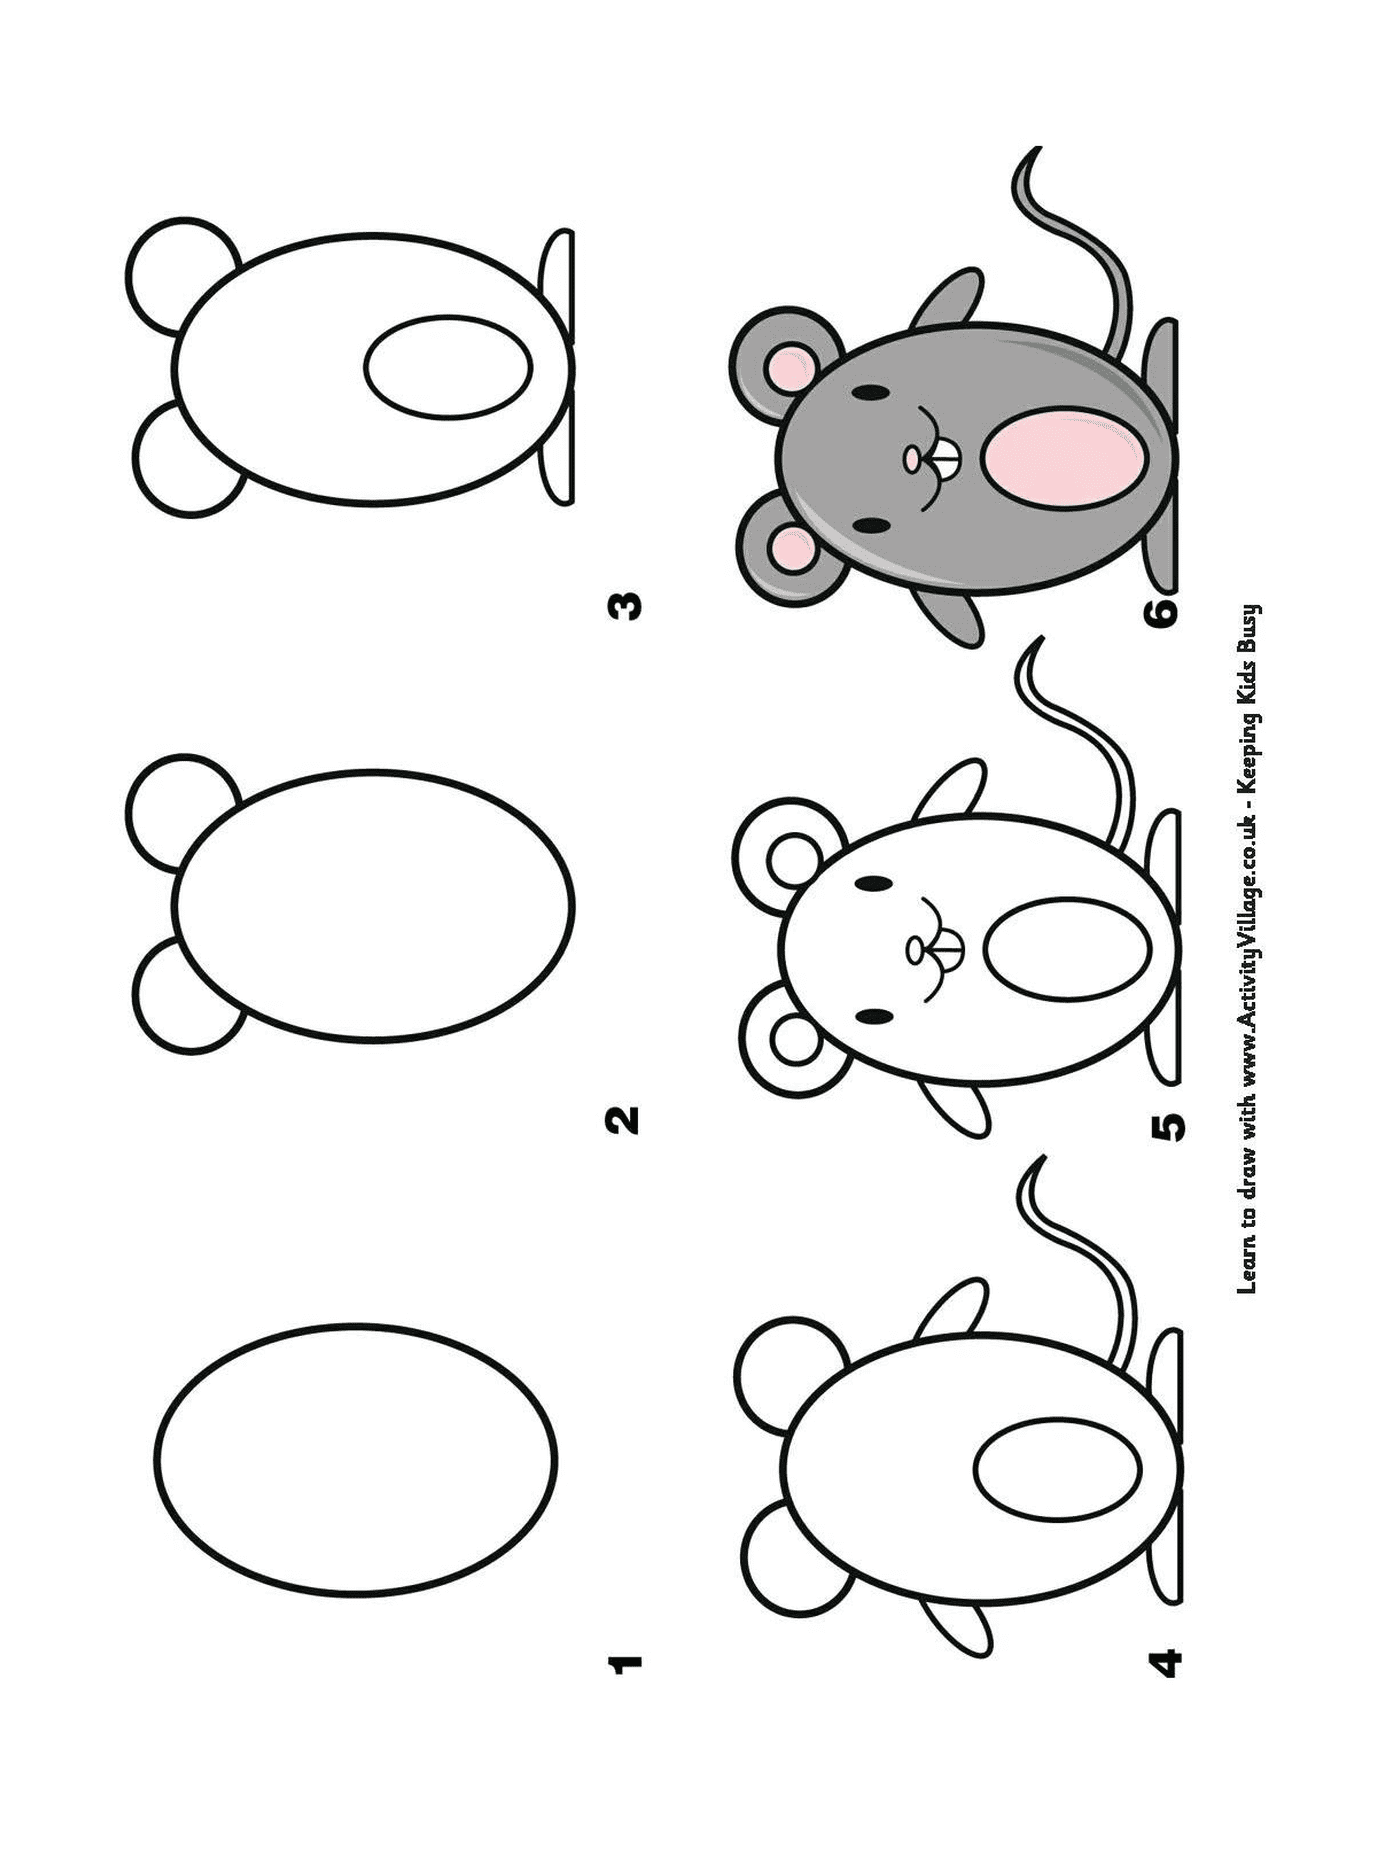  How to draw a mouse step by step 